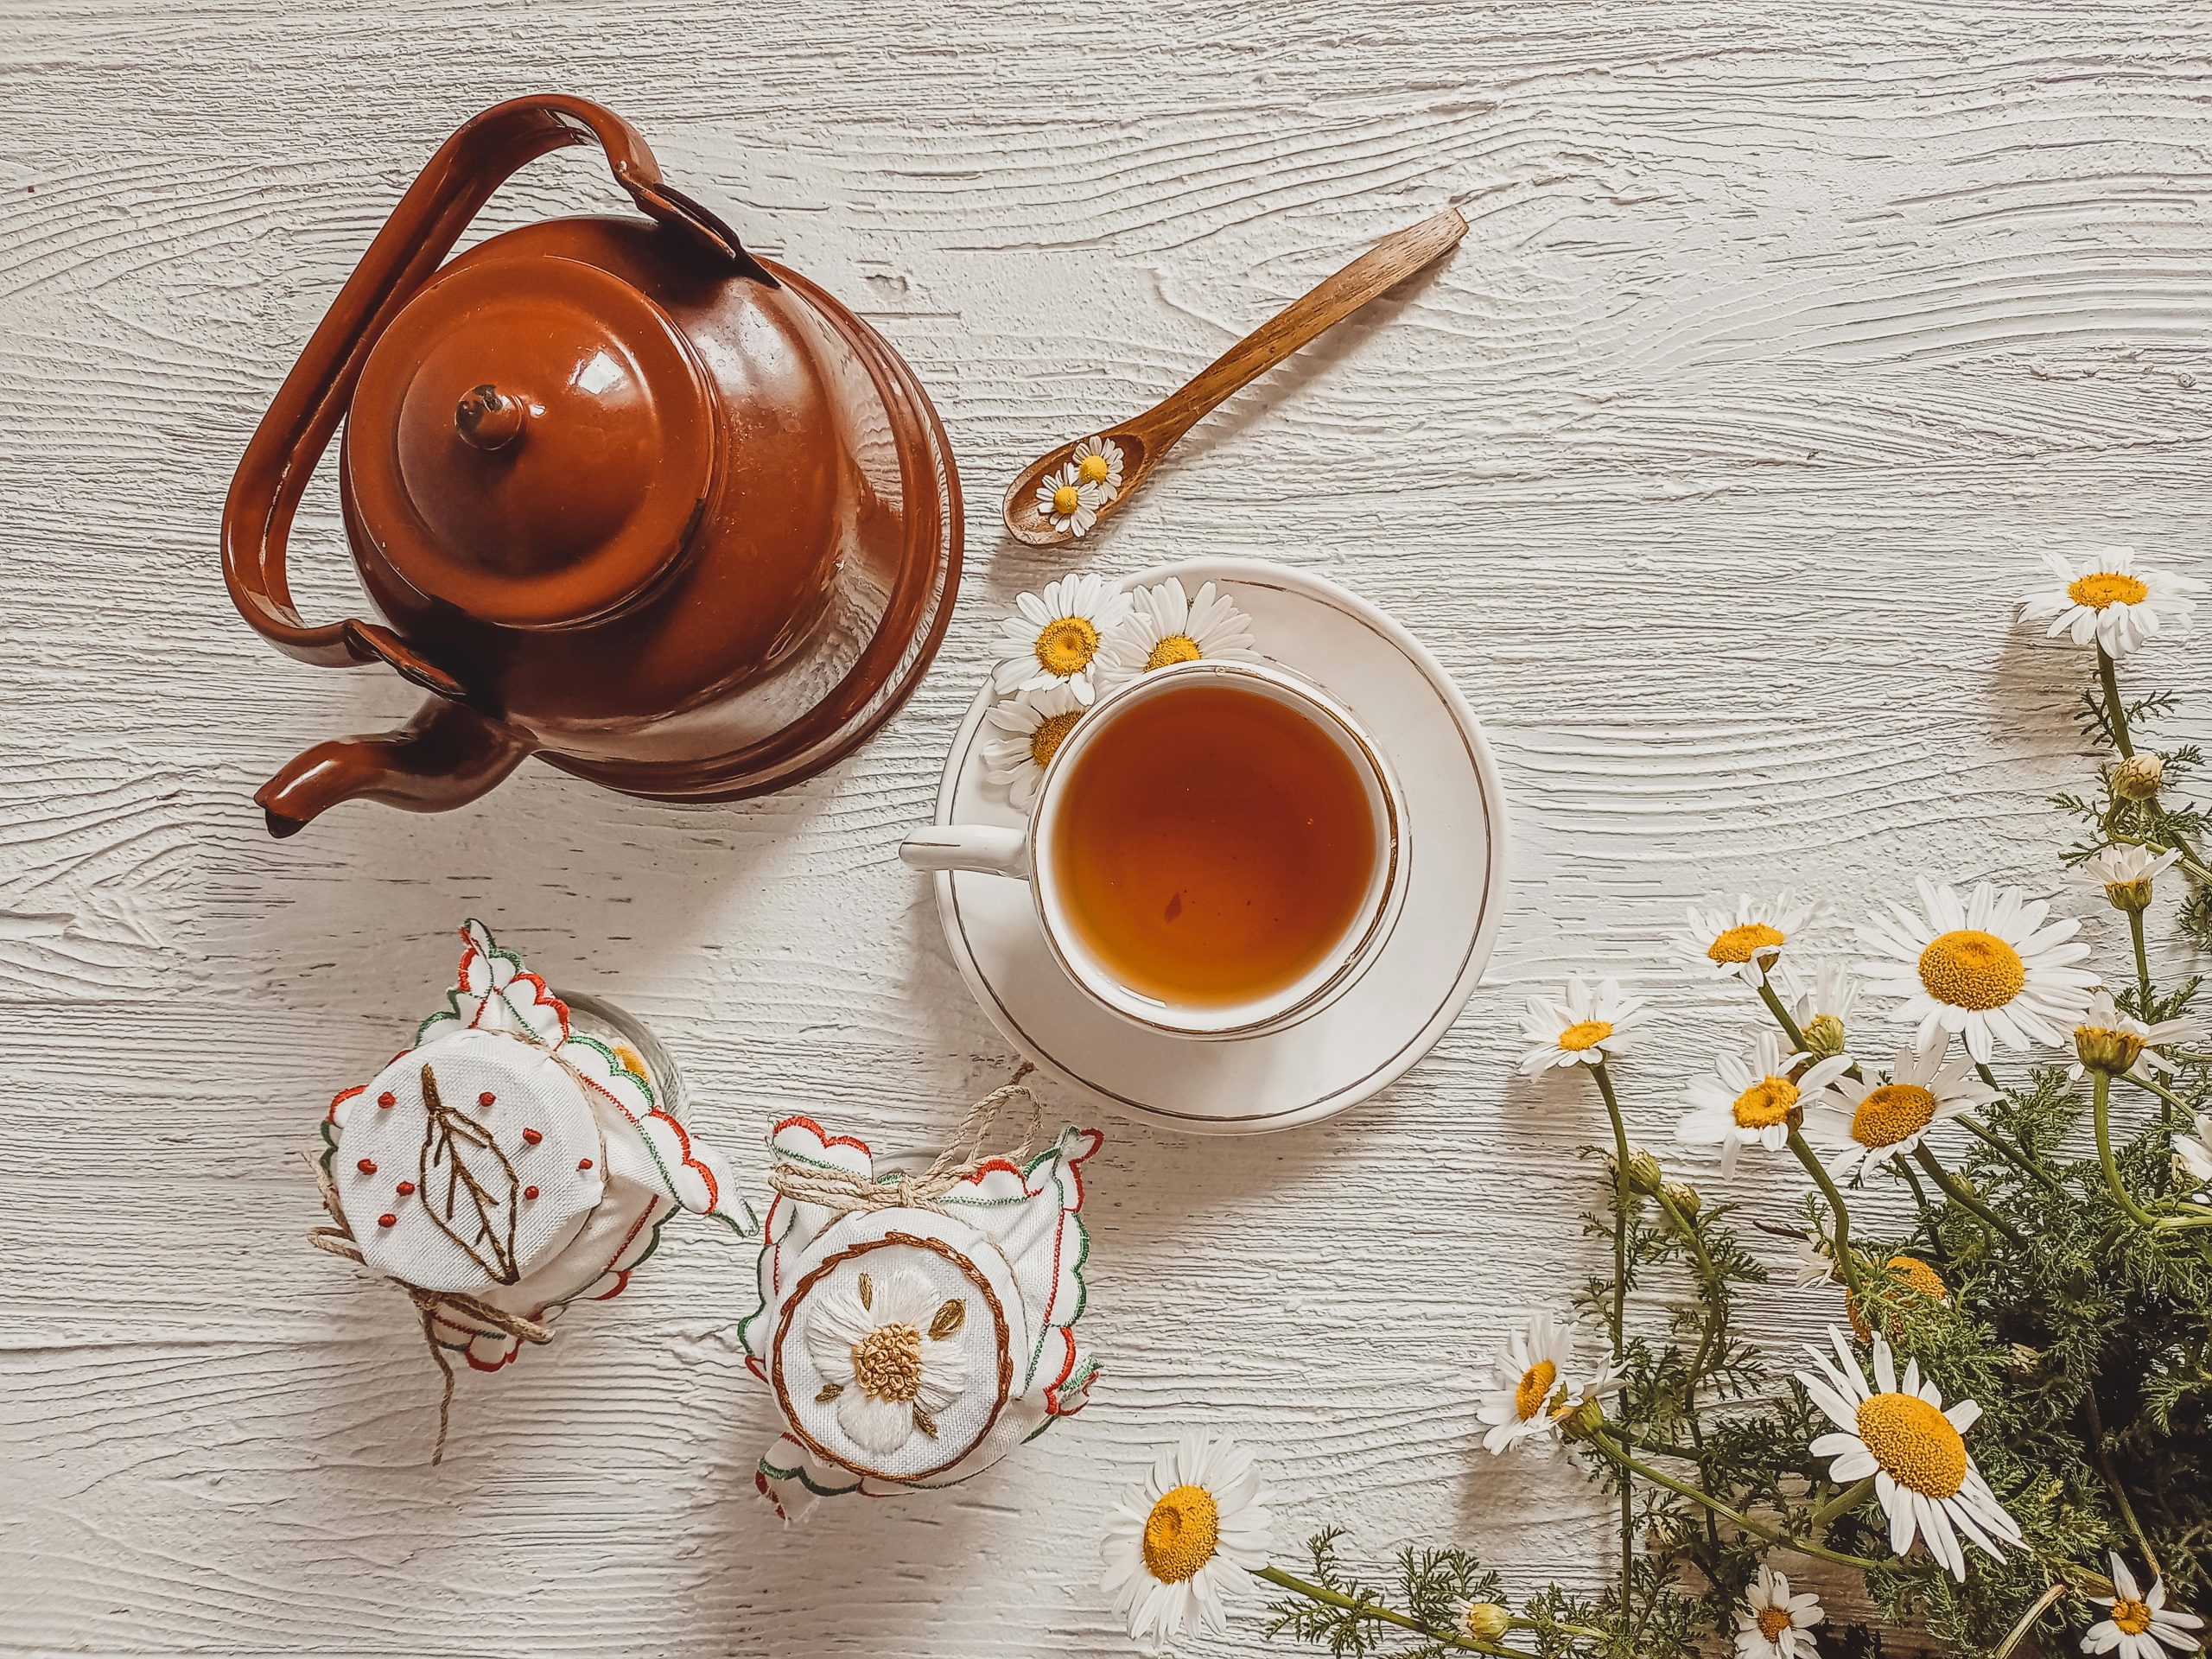 Camomile tea with teapot and freshly picked daisies.